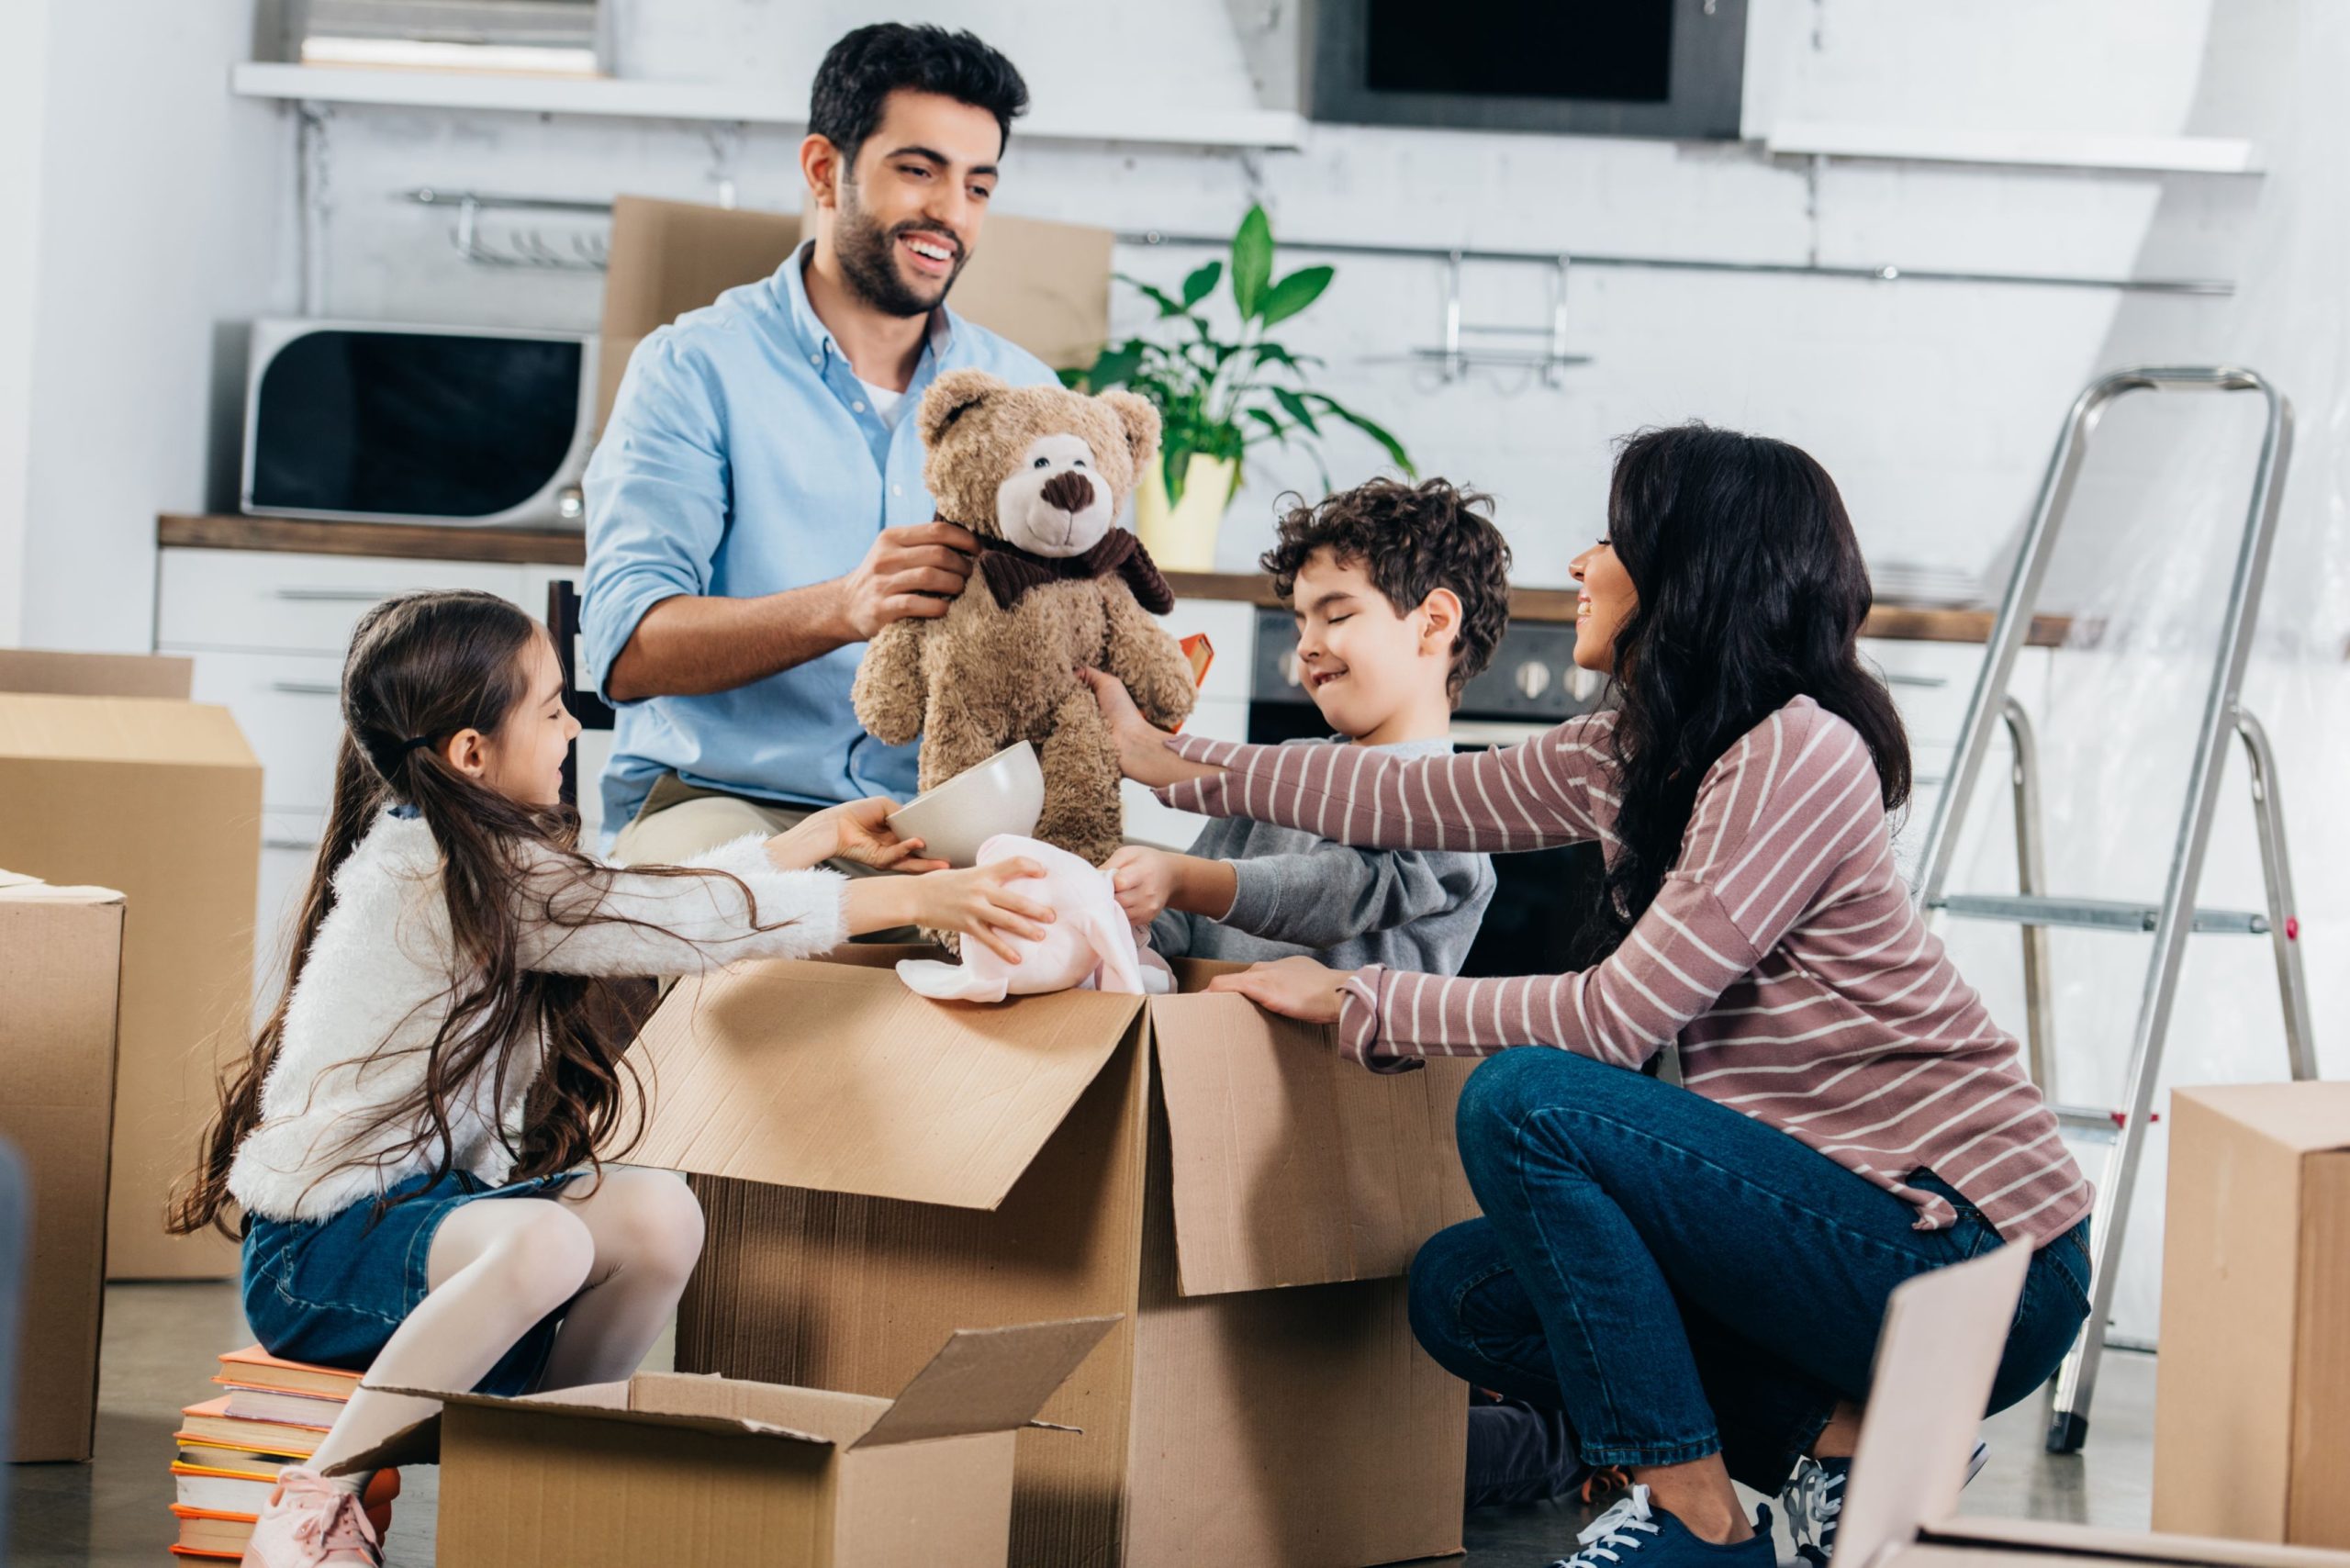 Cheerful latin father holding soft toy near hispanic family while unpacking boxes in new home